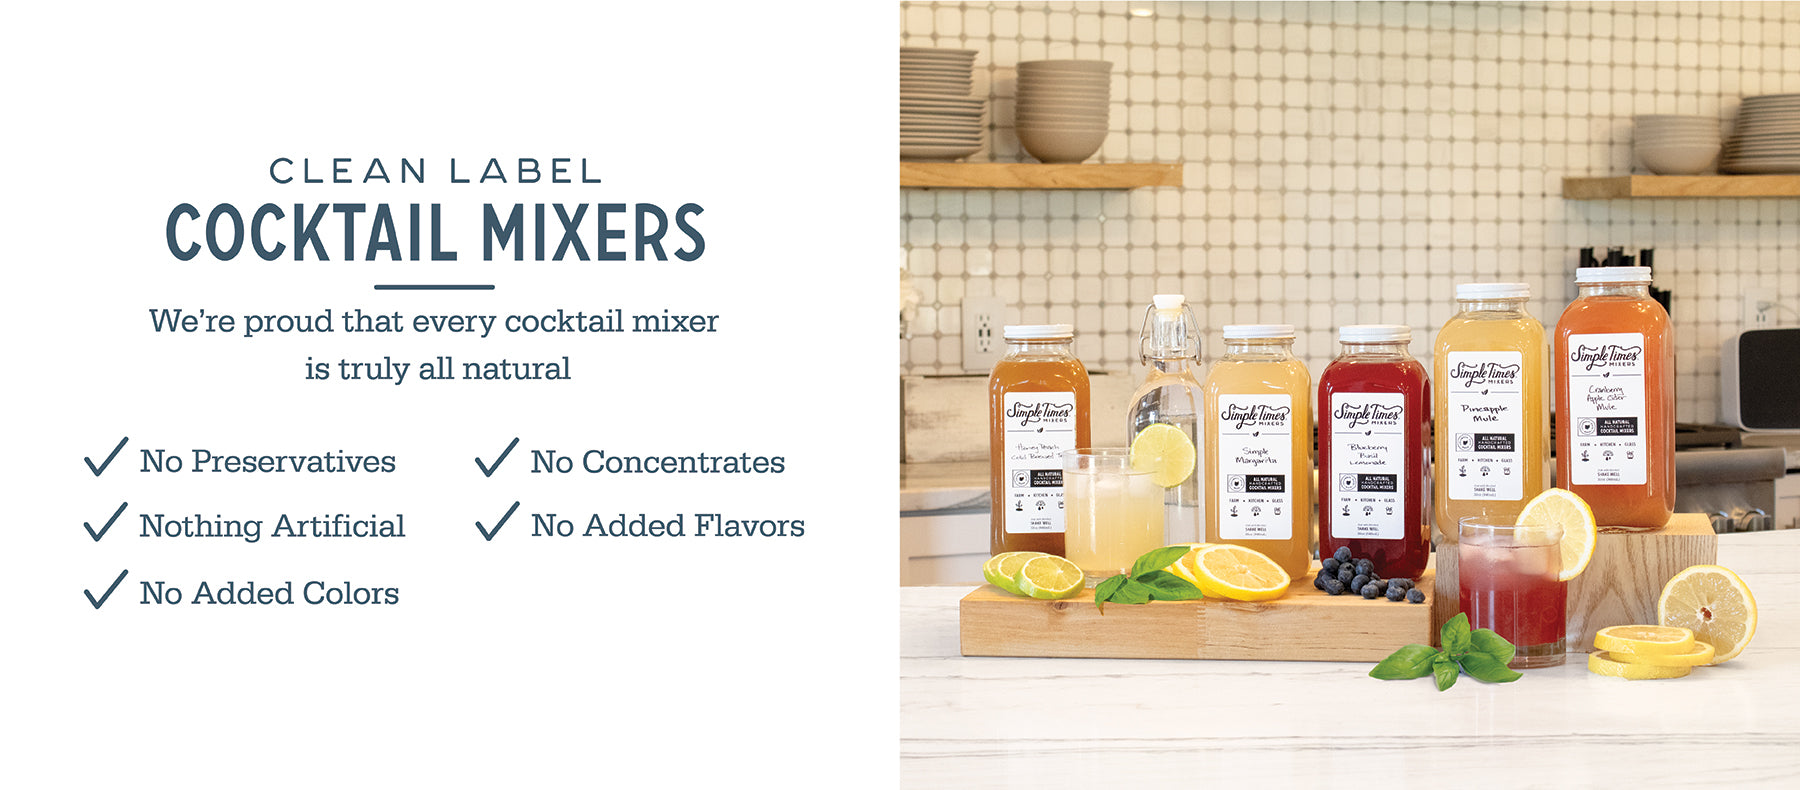 Clean Label Cocktail Mixers